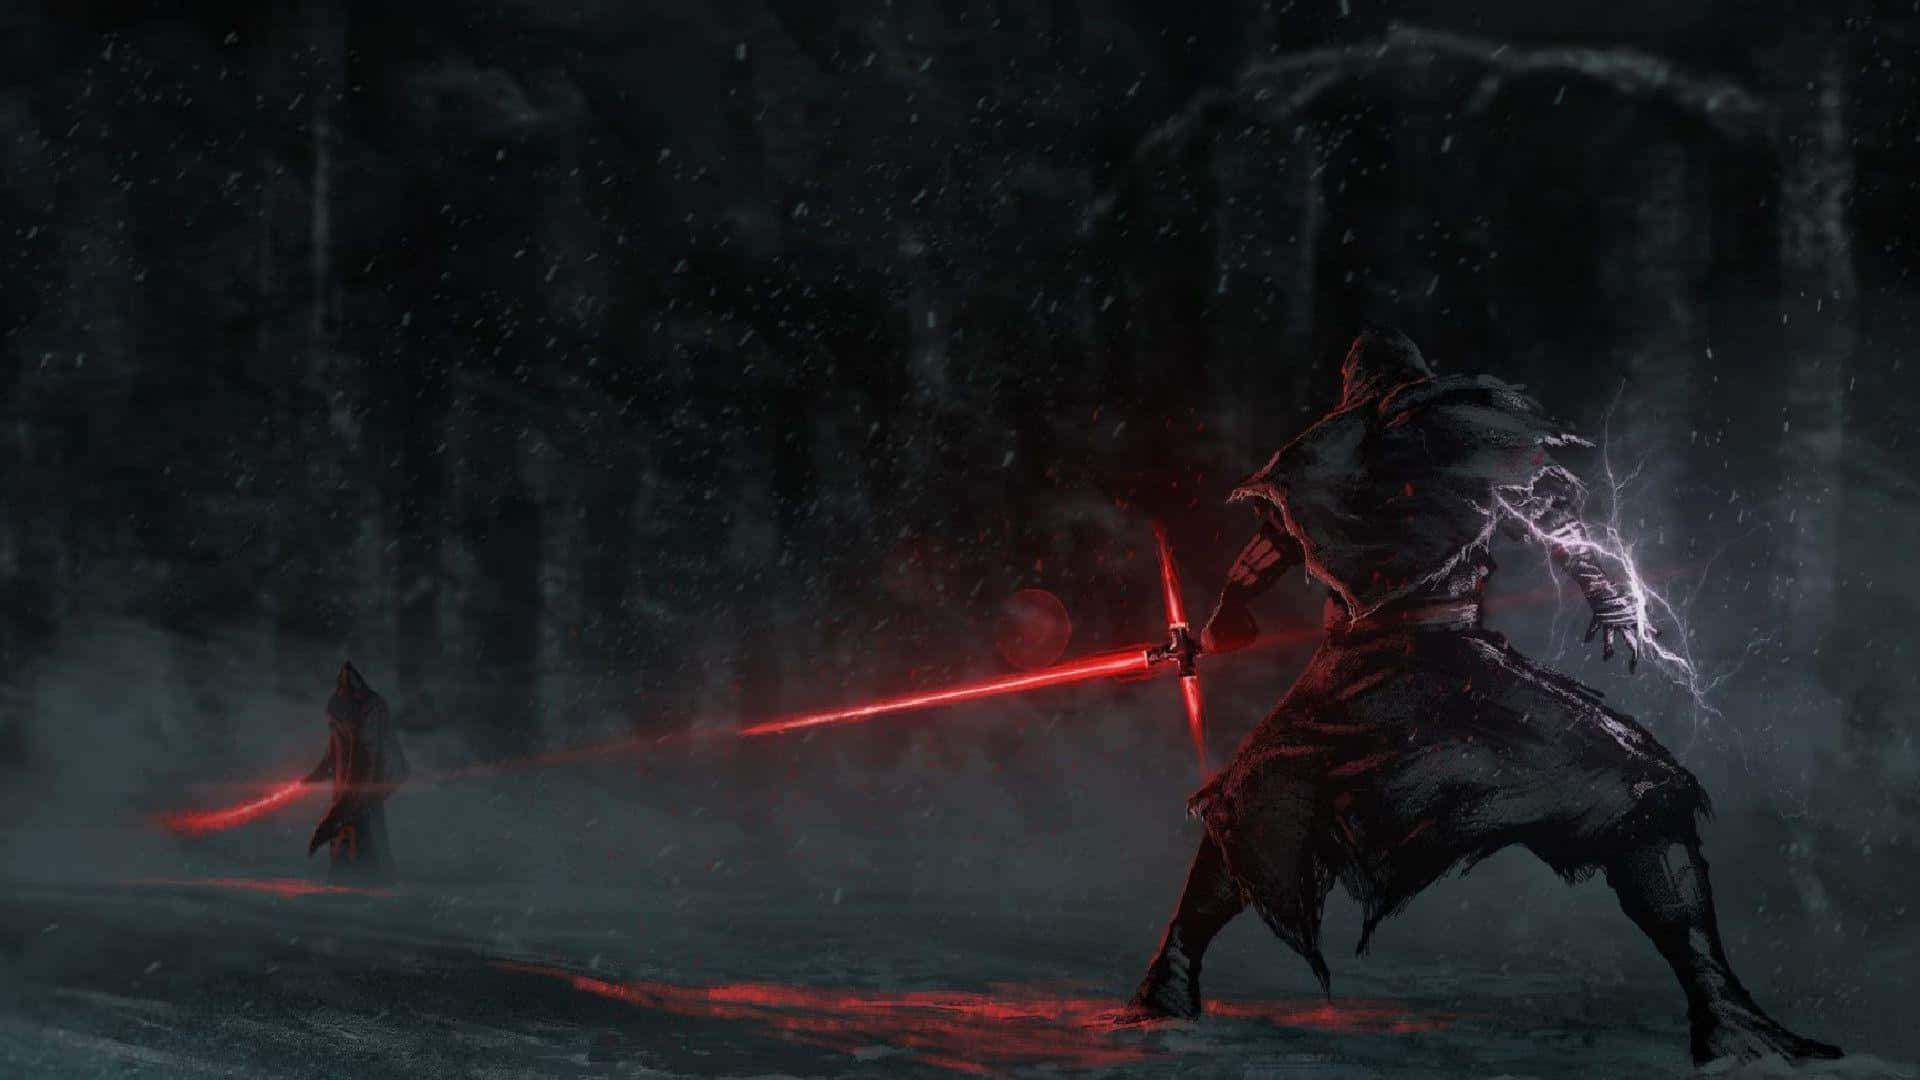 The Dark Side of the Force is Rising" Wallpaper